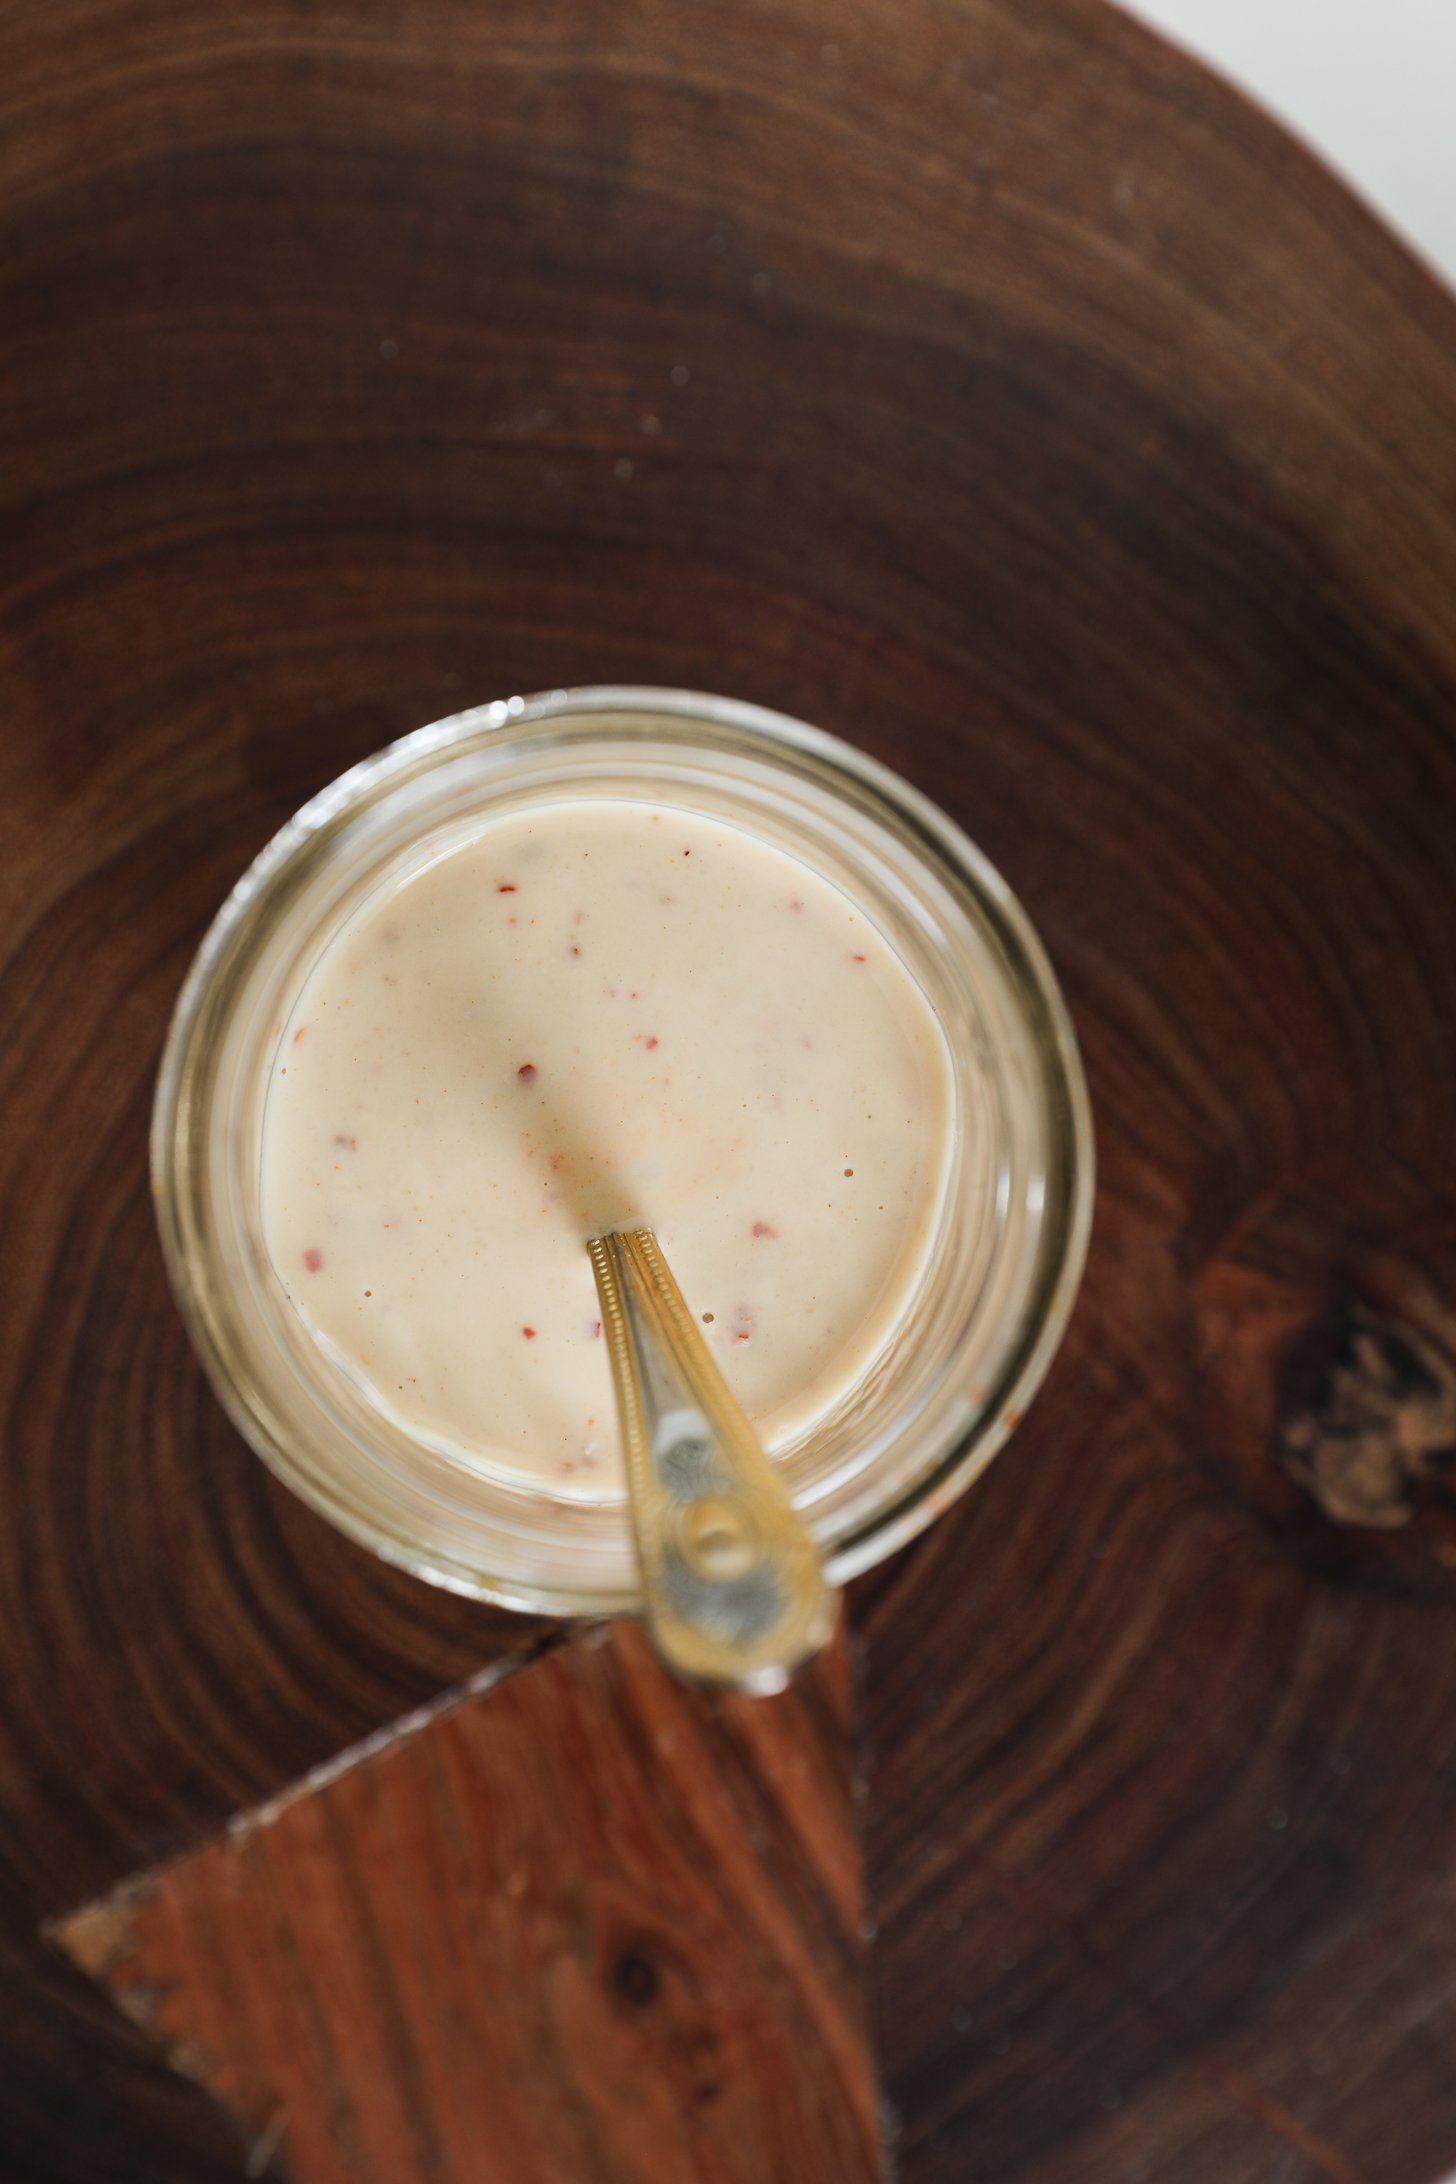 A mason jar holds creamy white salad dressing, with a spoon resting inside.